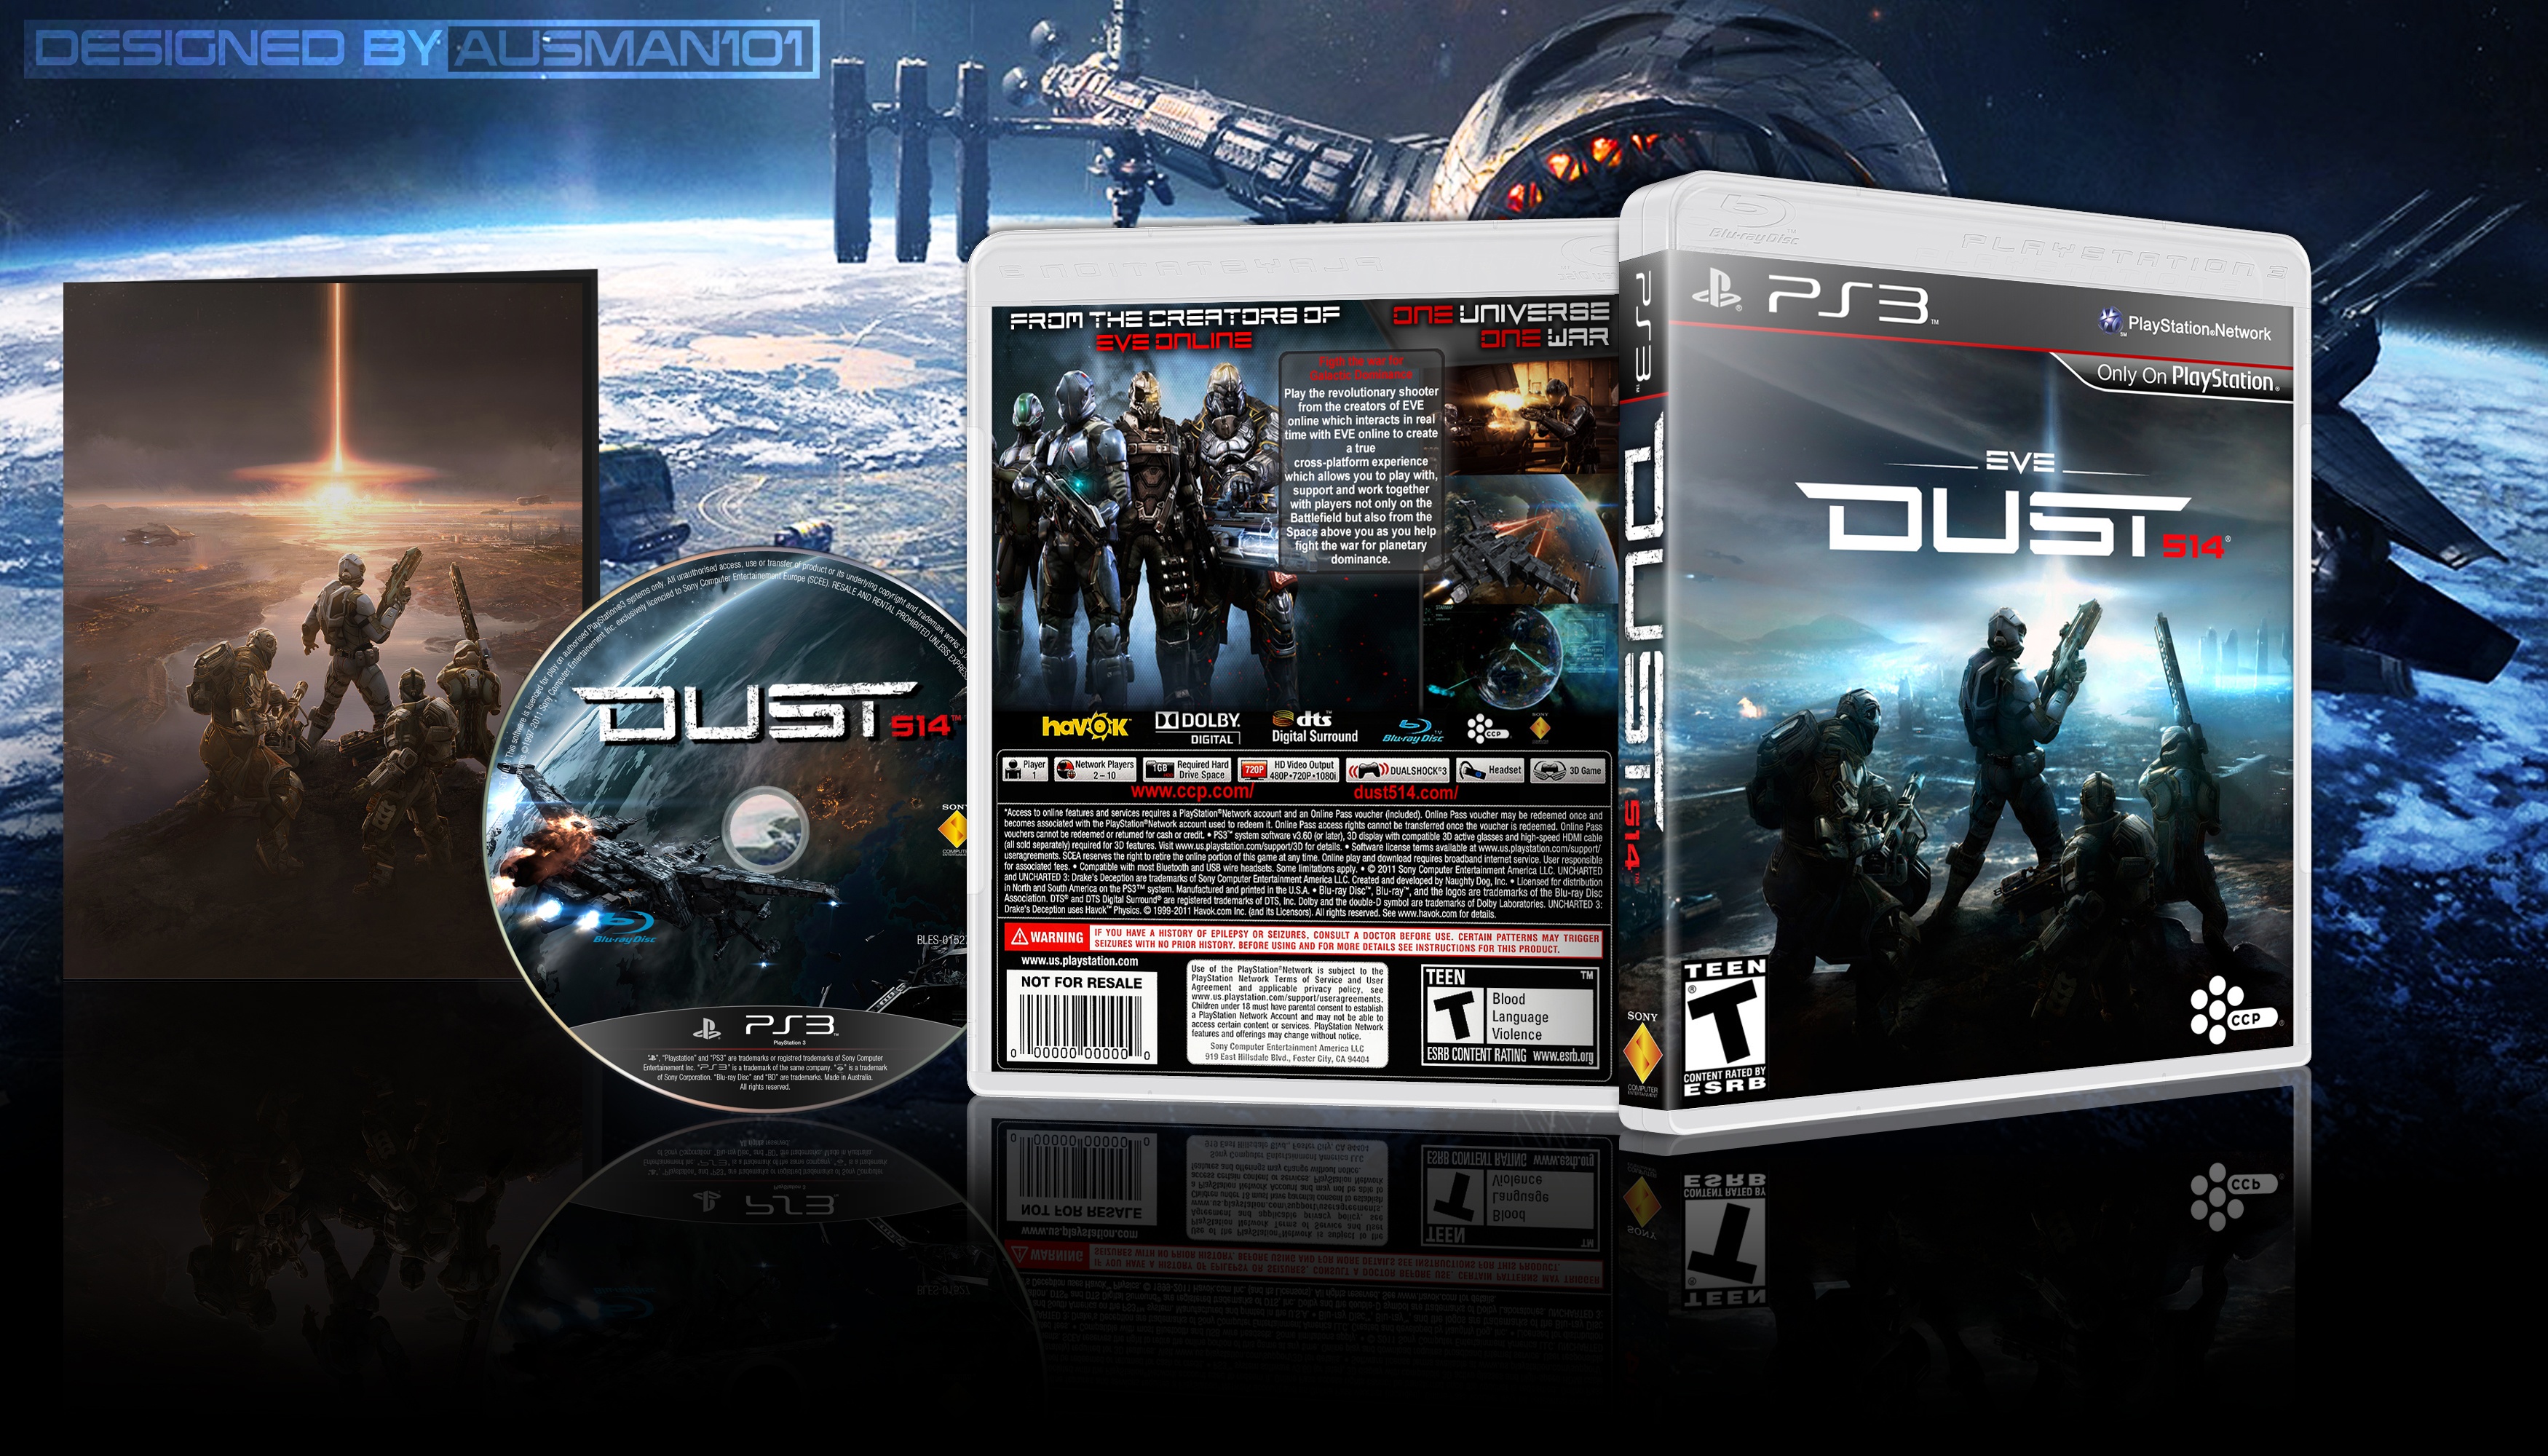 Dust 514 box cover